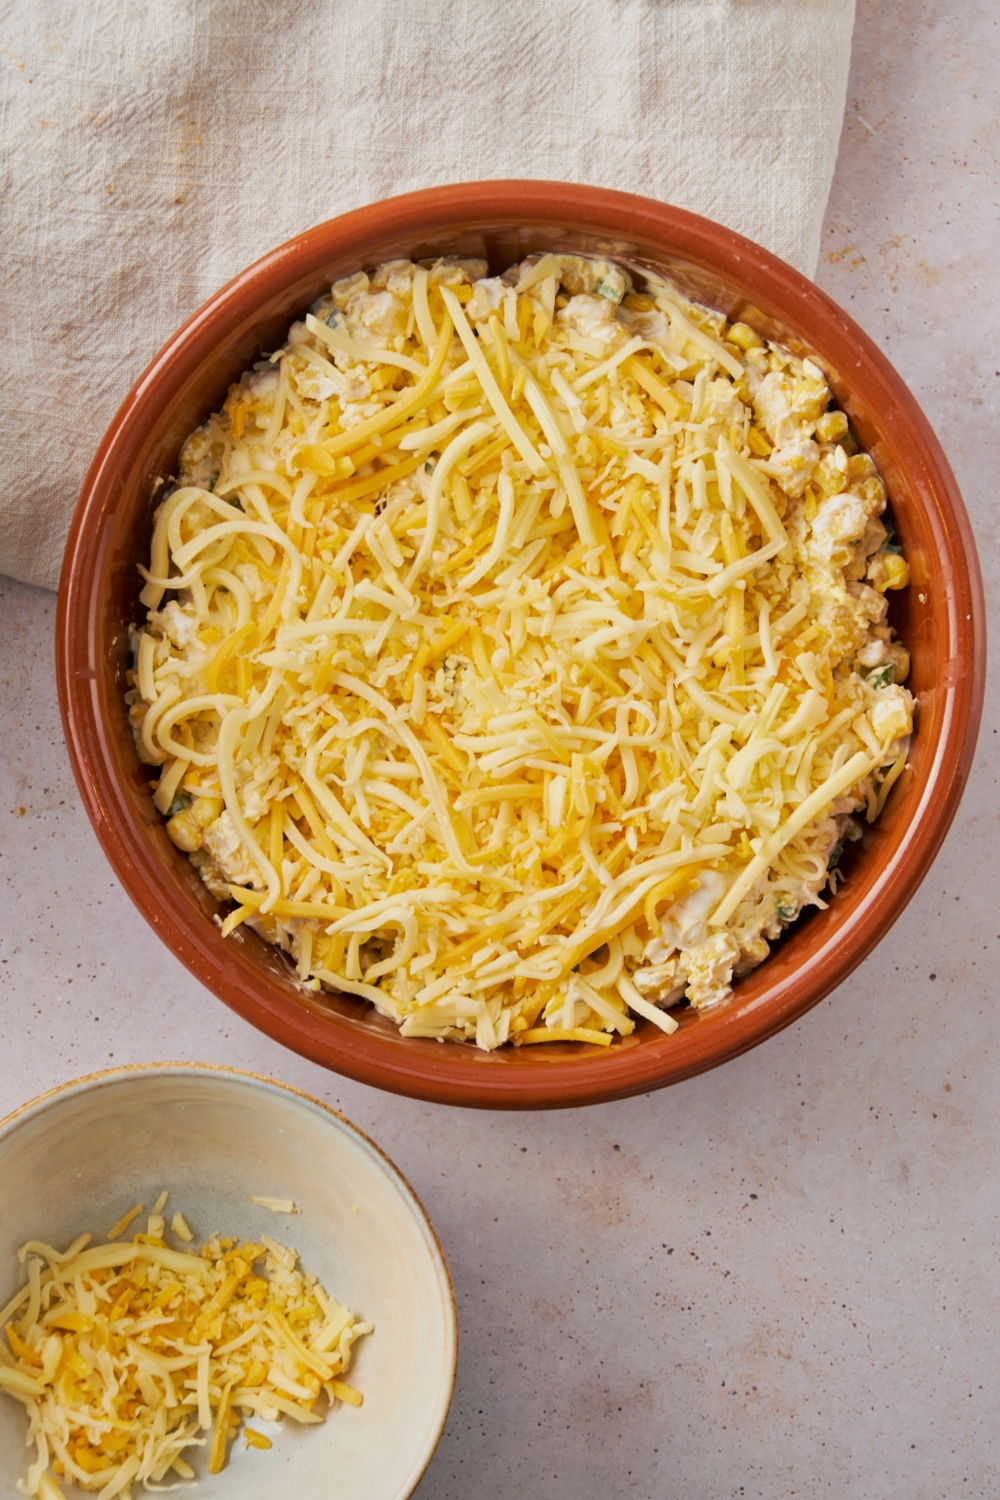 Shredded cheese on top of a jalapeno corn casserole in a red dish